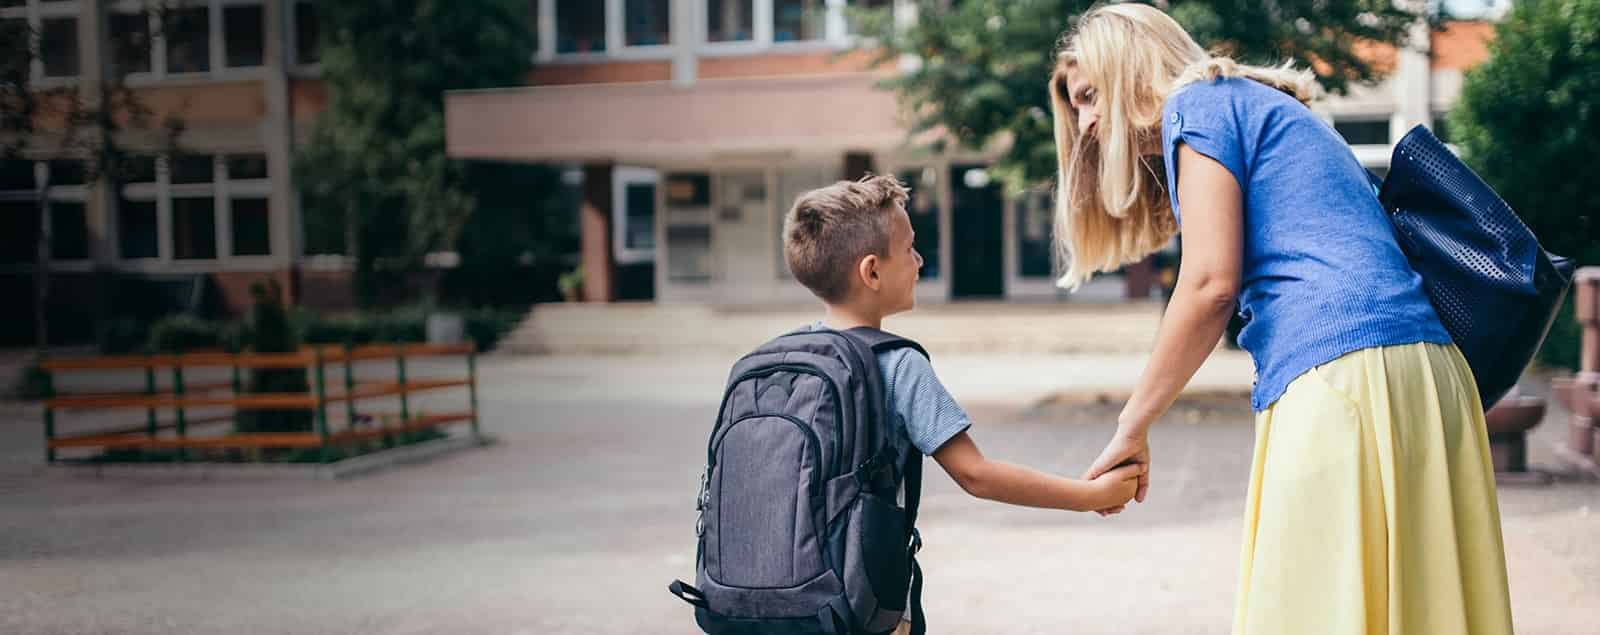 Mother seeing son off to school